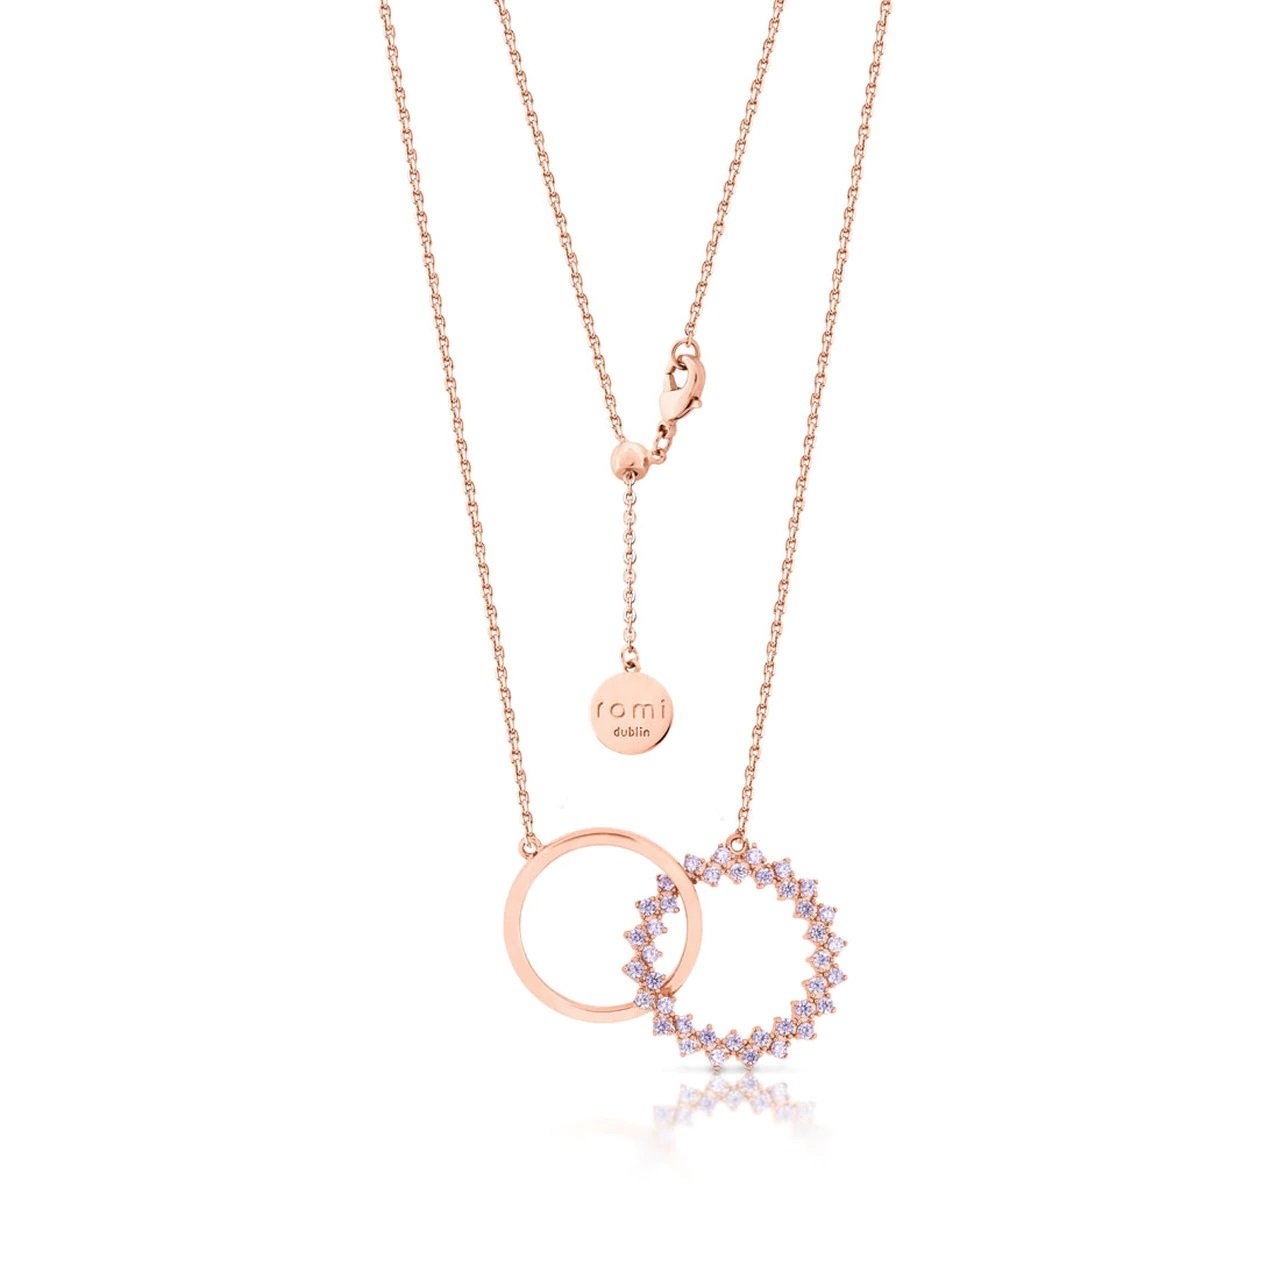 Romi Dublin Rose Gold Purple Interlocking Pendant  Simple and understated this collection has a contemporary and sleek look that will allow you to accessorise with any outfit.